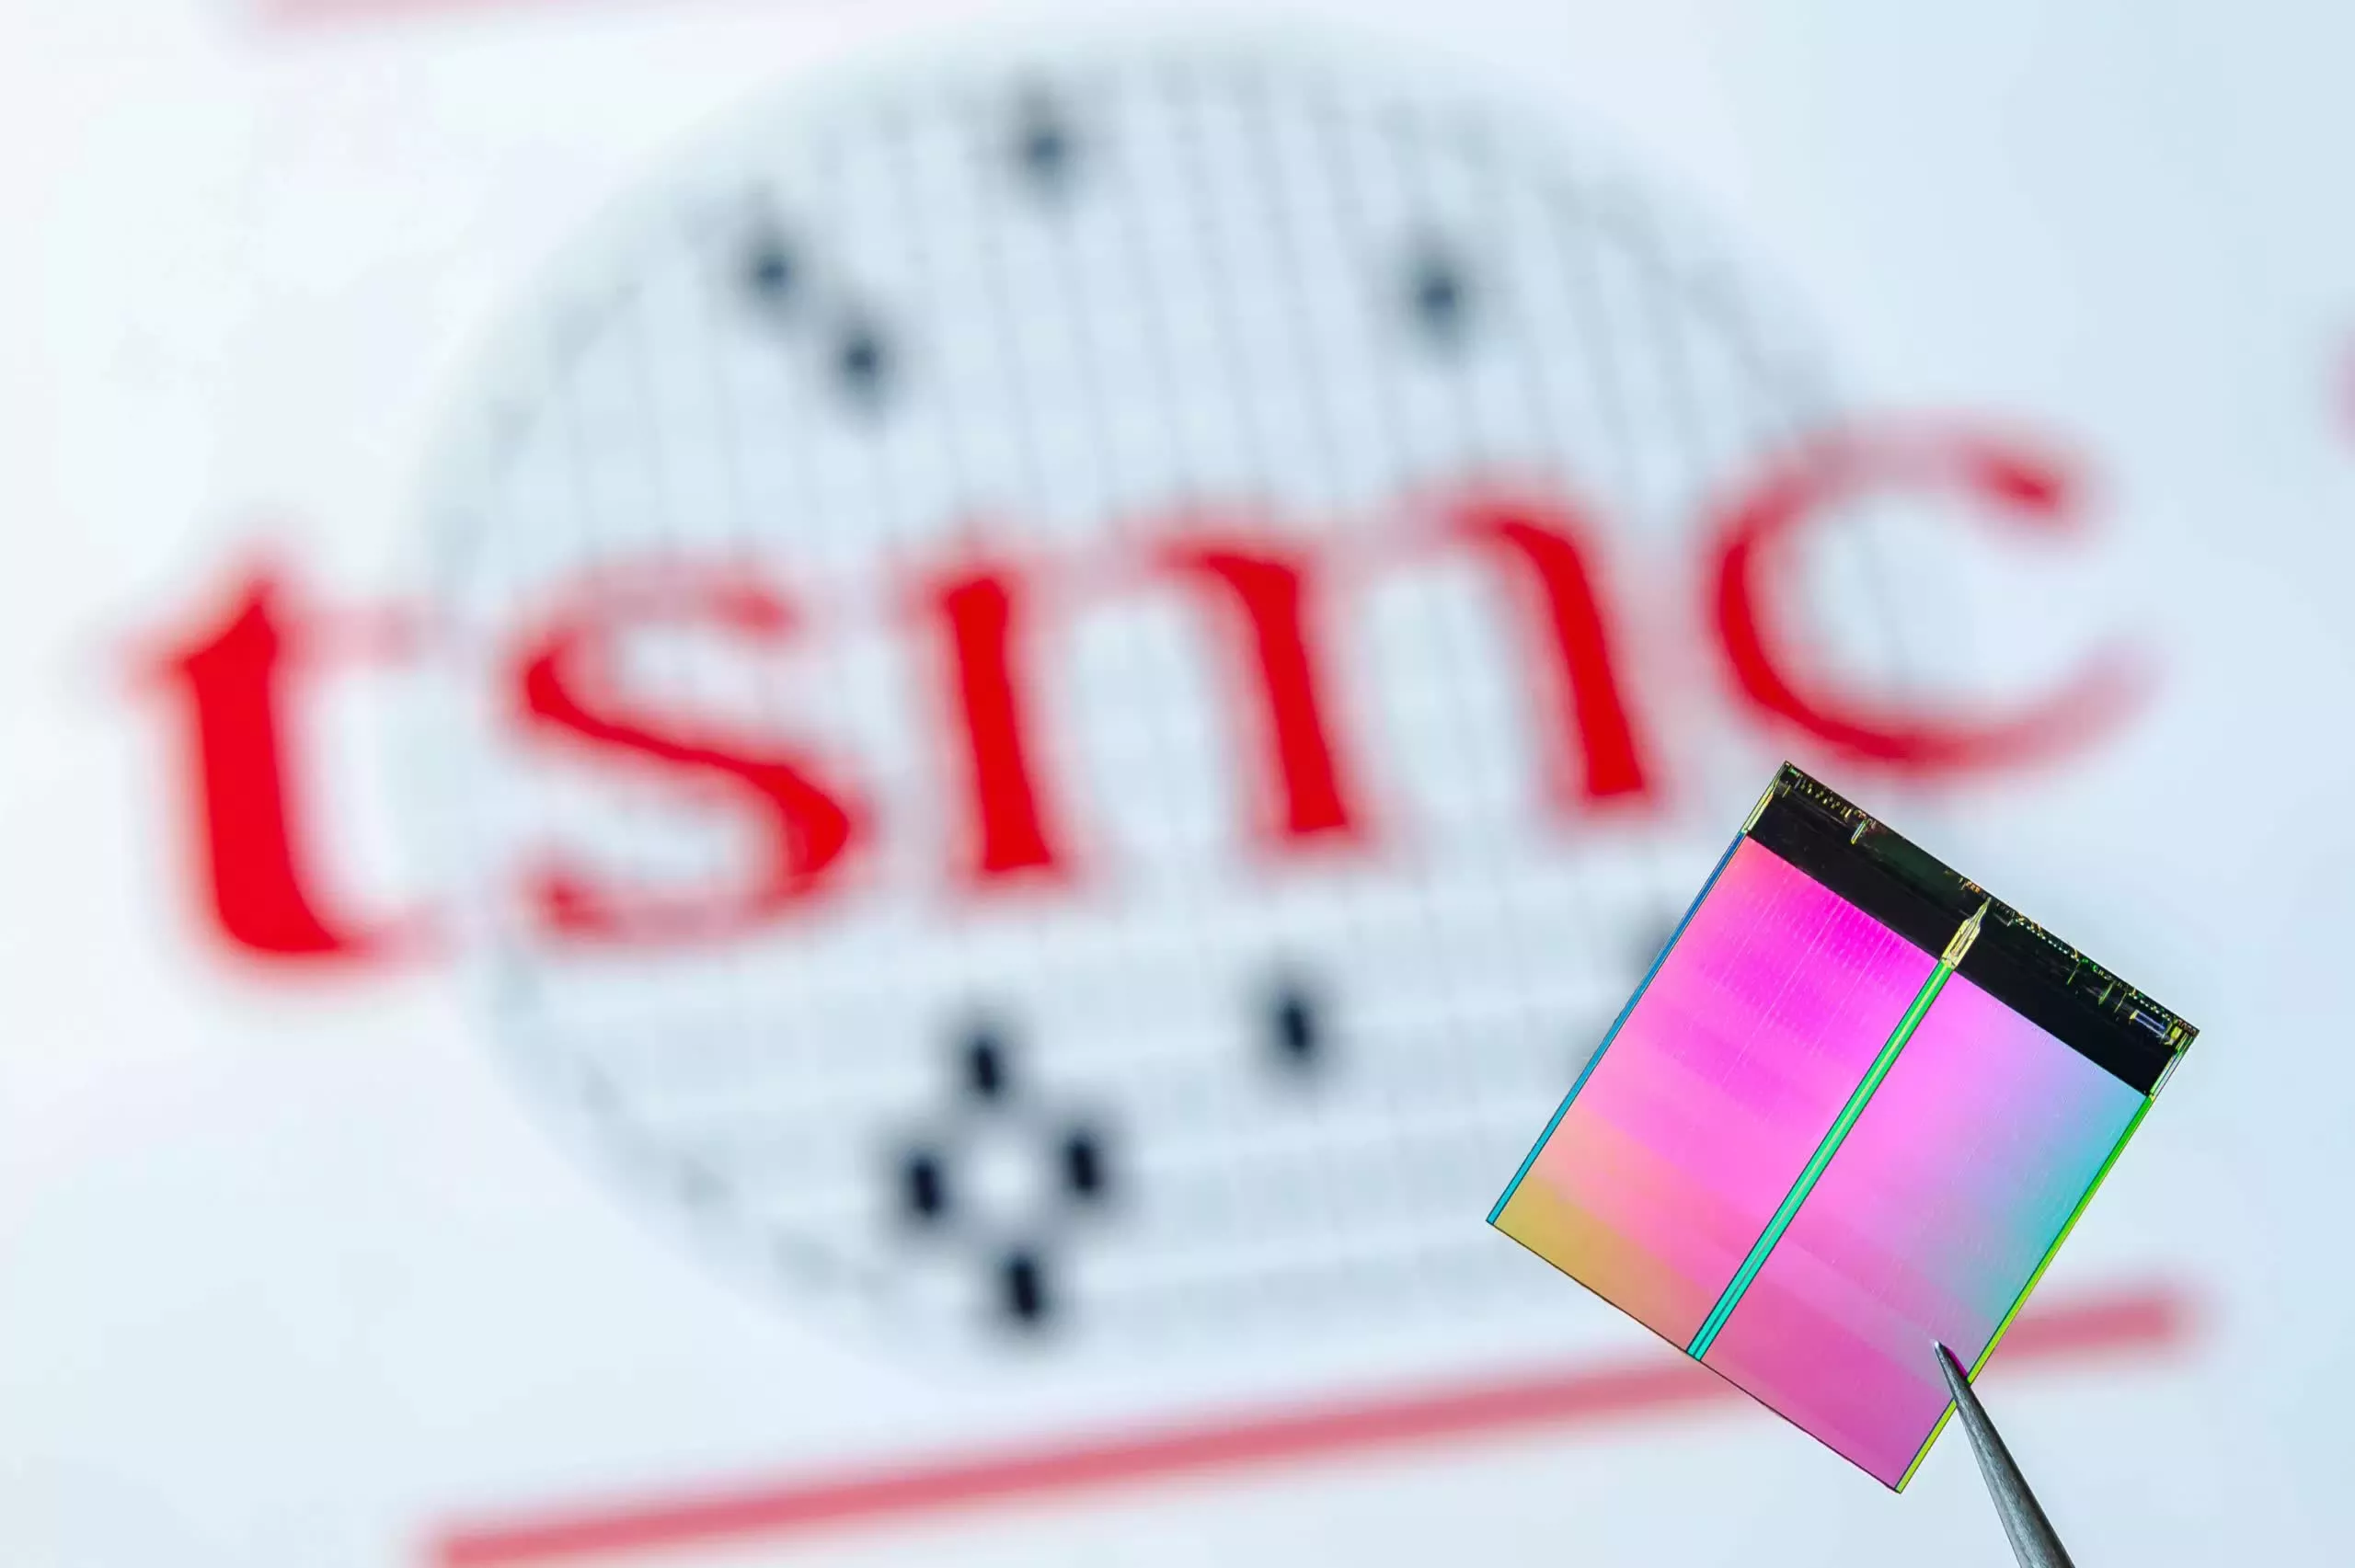 TSMC: Shortage of inexpensive chips, ranging from $0.50 to $10, is bottlenecking the supply chain